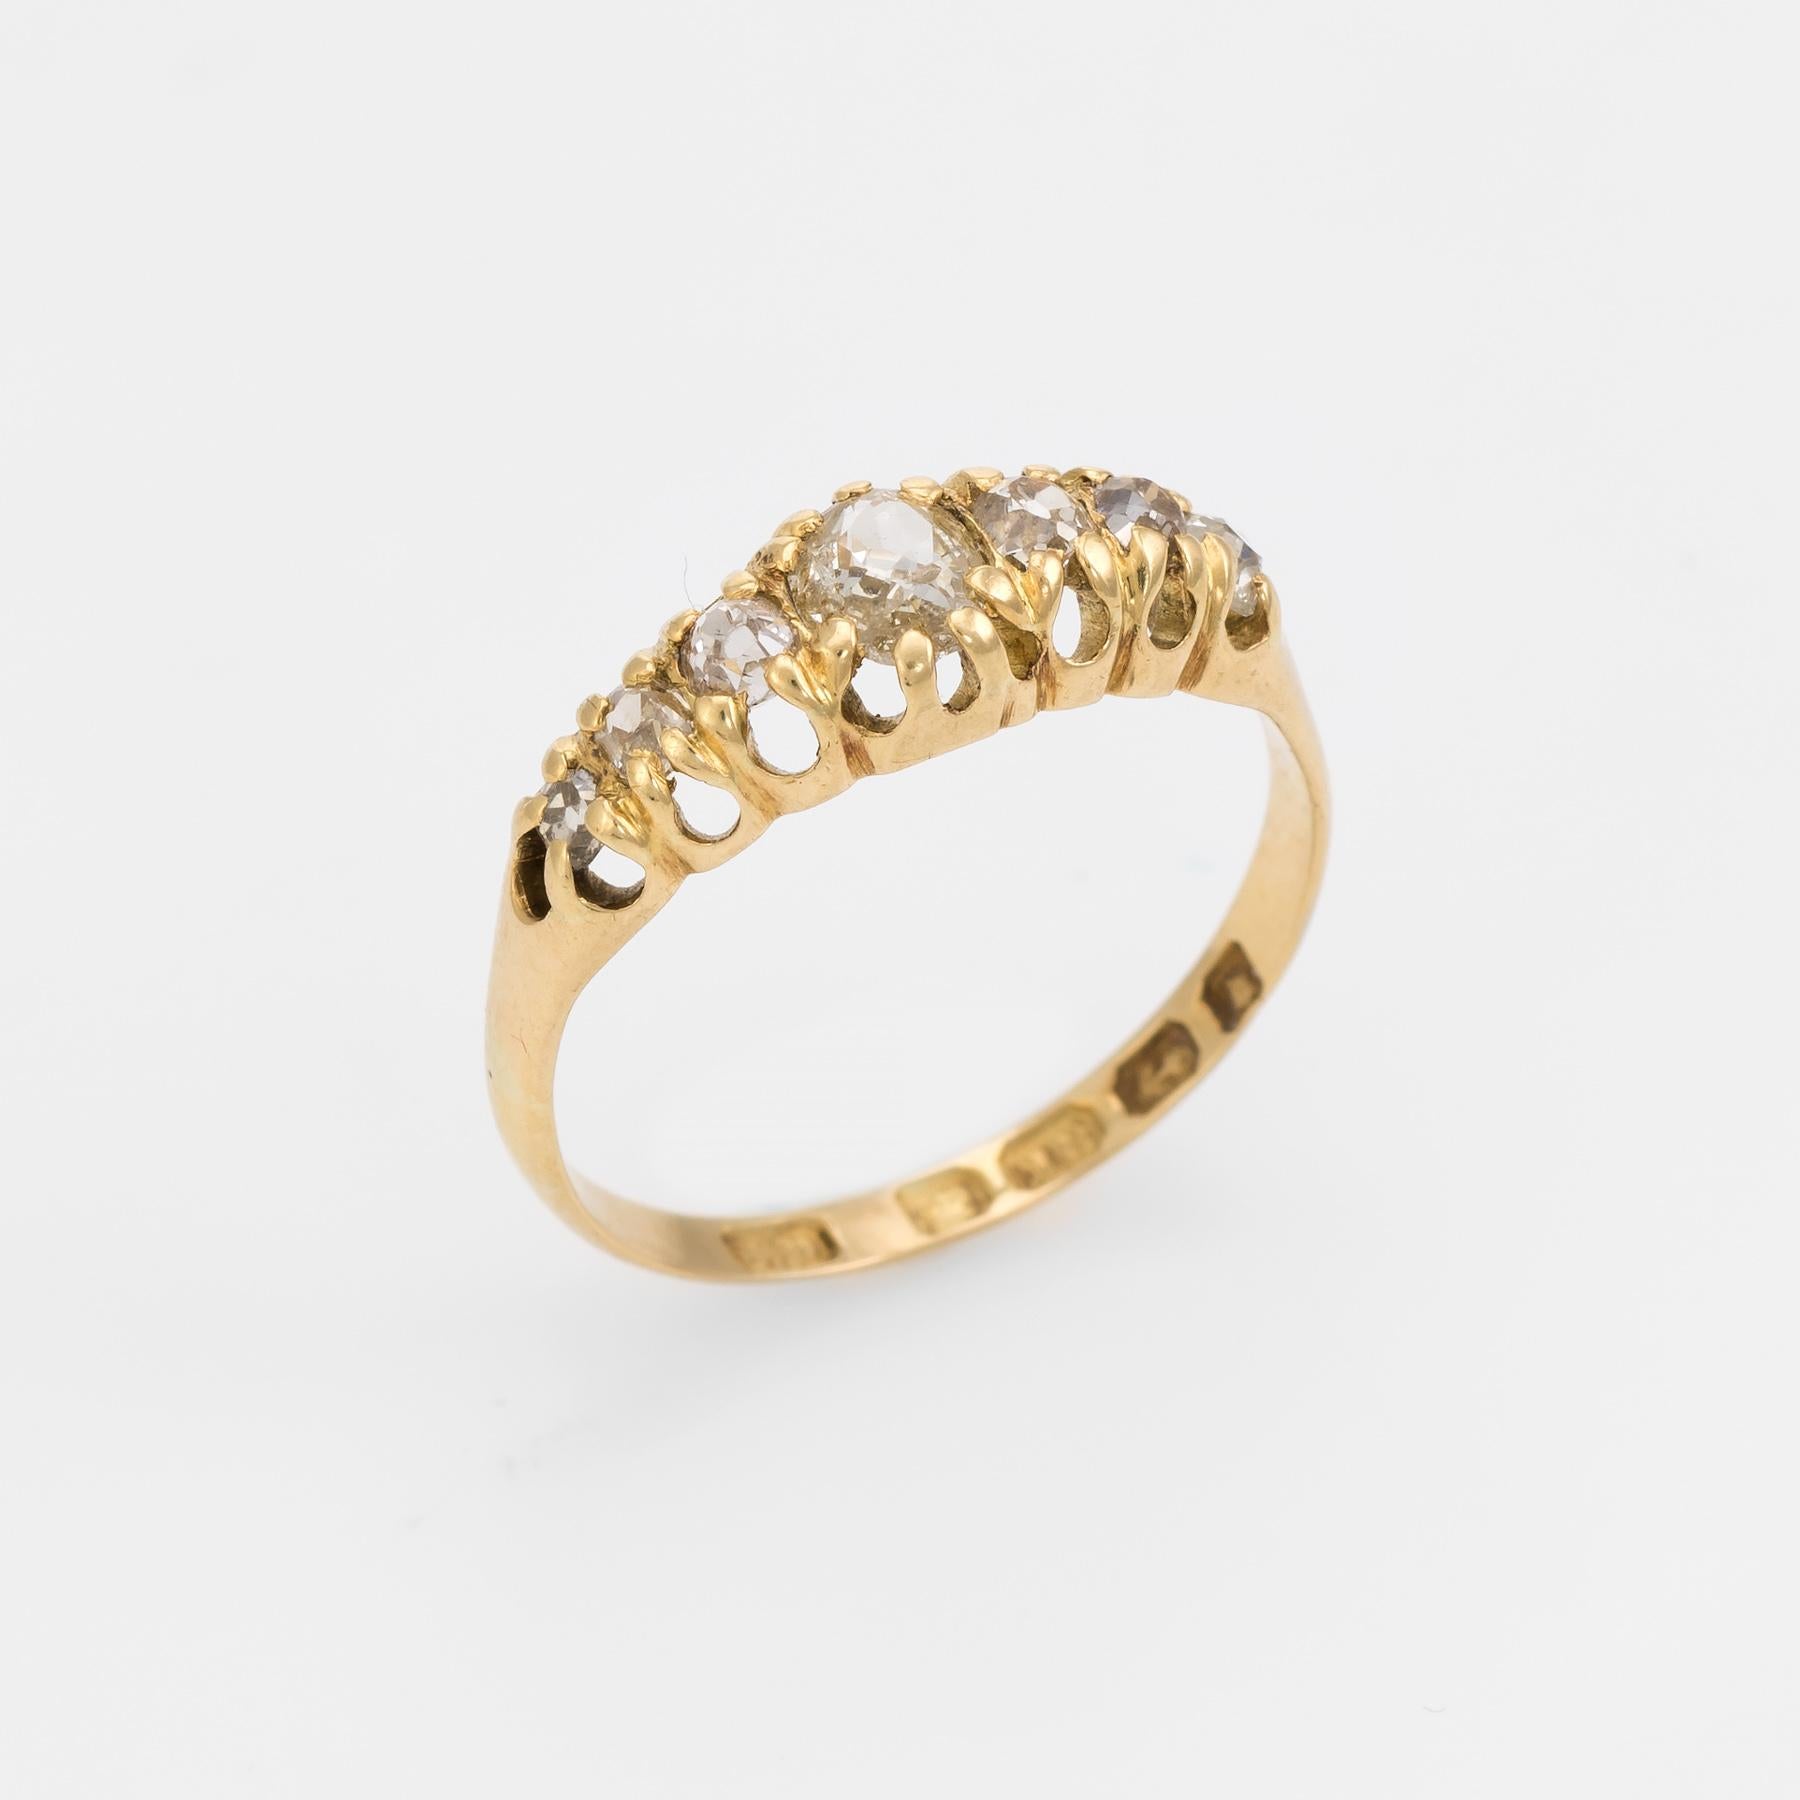 Finely detailed antique Victorian era ring set with 7 graduated old mine cut diamonds (circa 1878), crafted in 18 karat yellow gold. 

The diamonds graduate in size from the center (estimated at 0.50 carats) to the sides graduating from 0.15 to 0.08